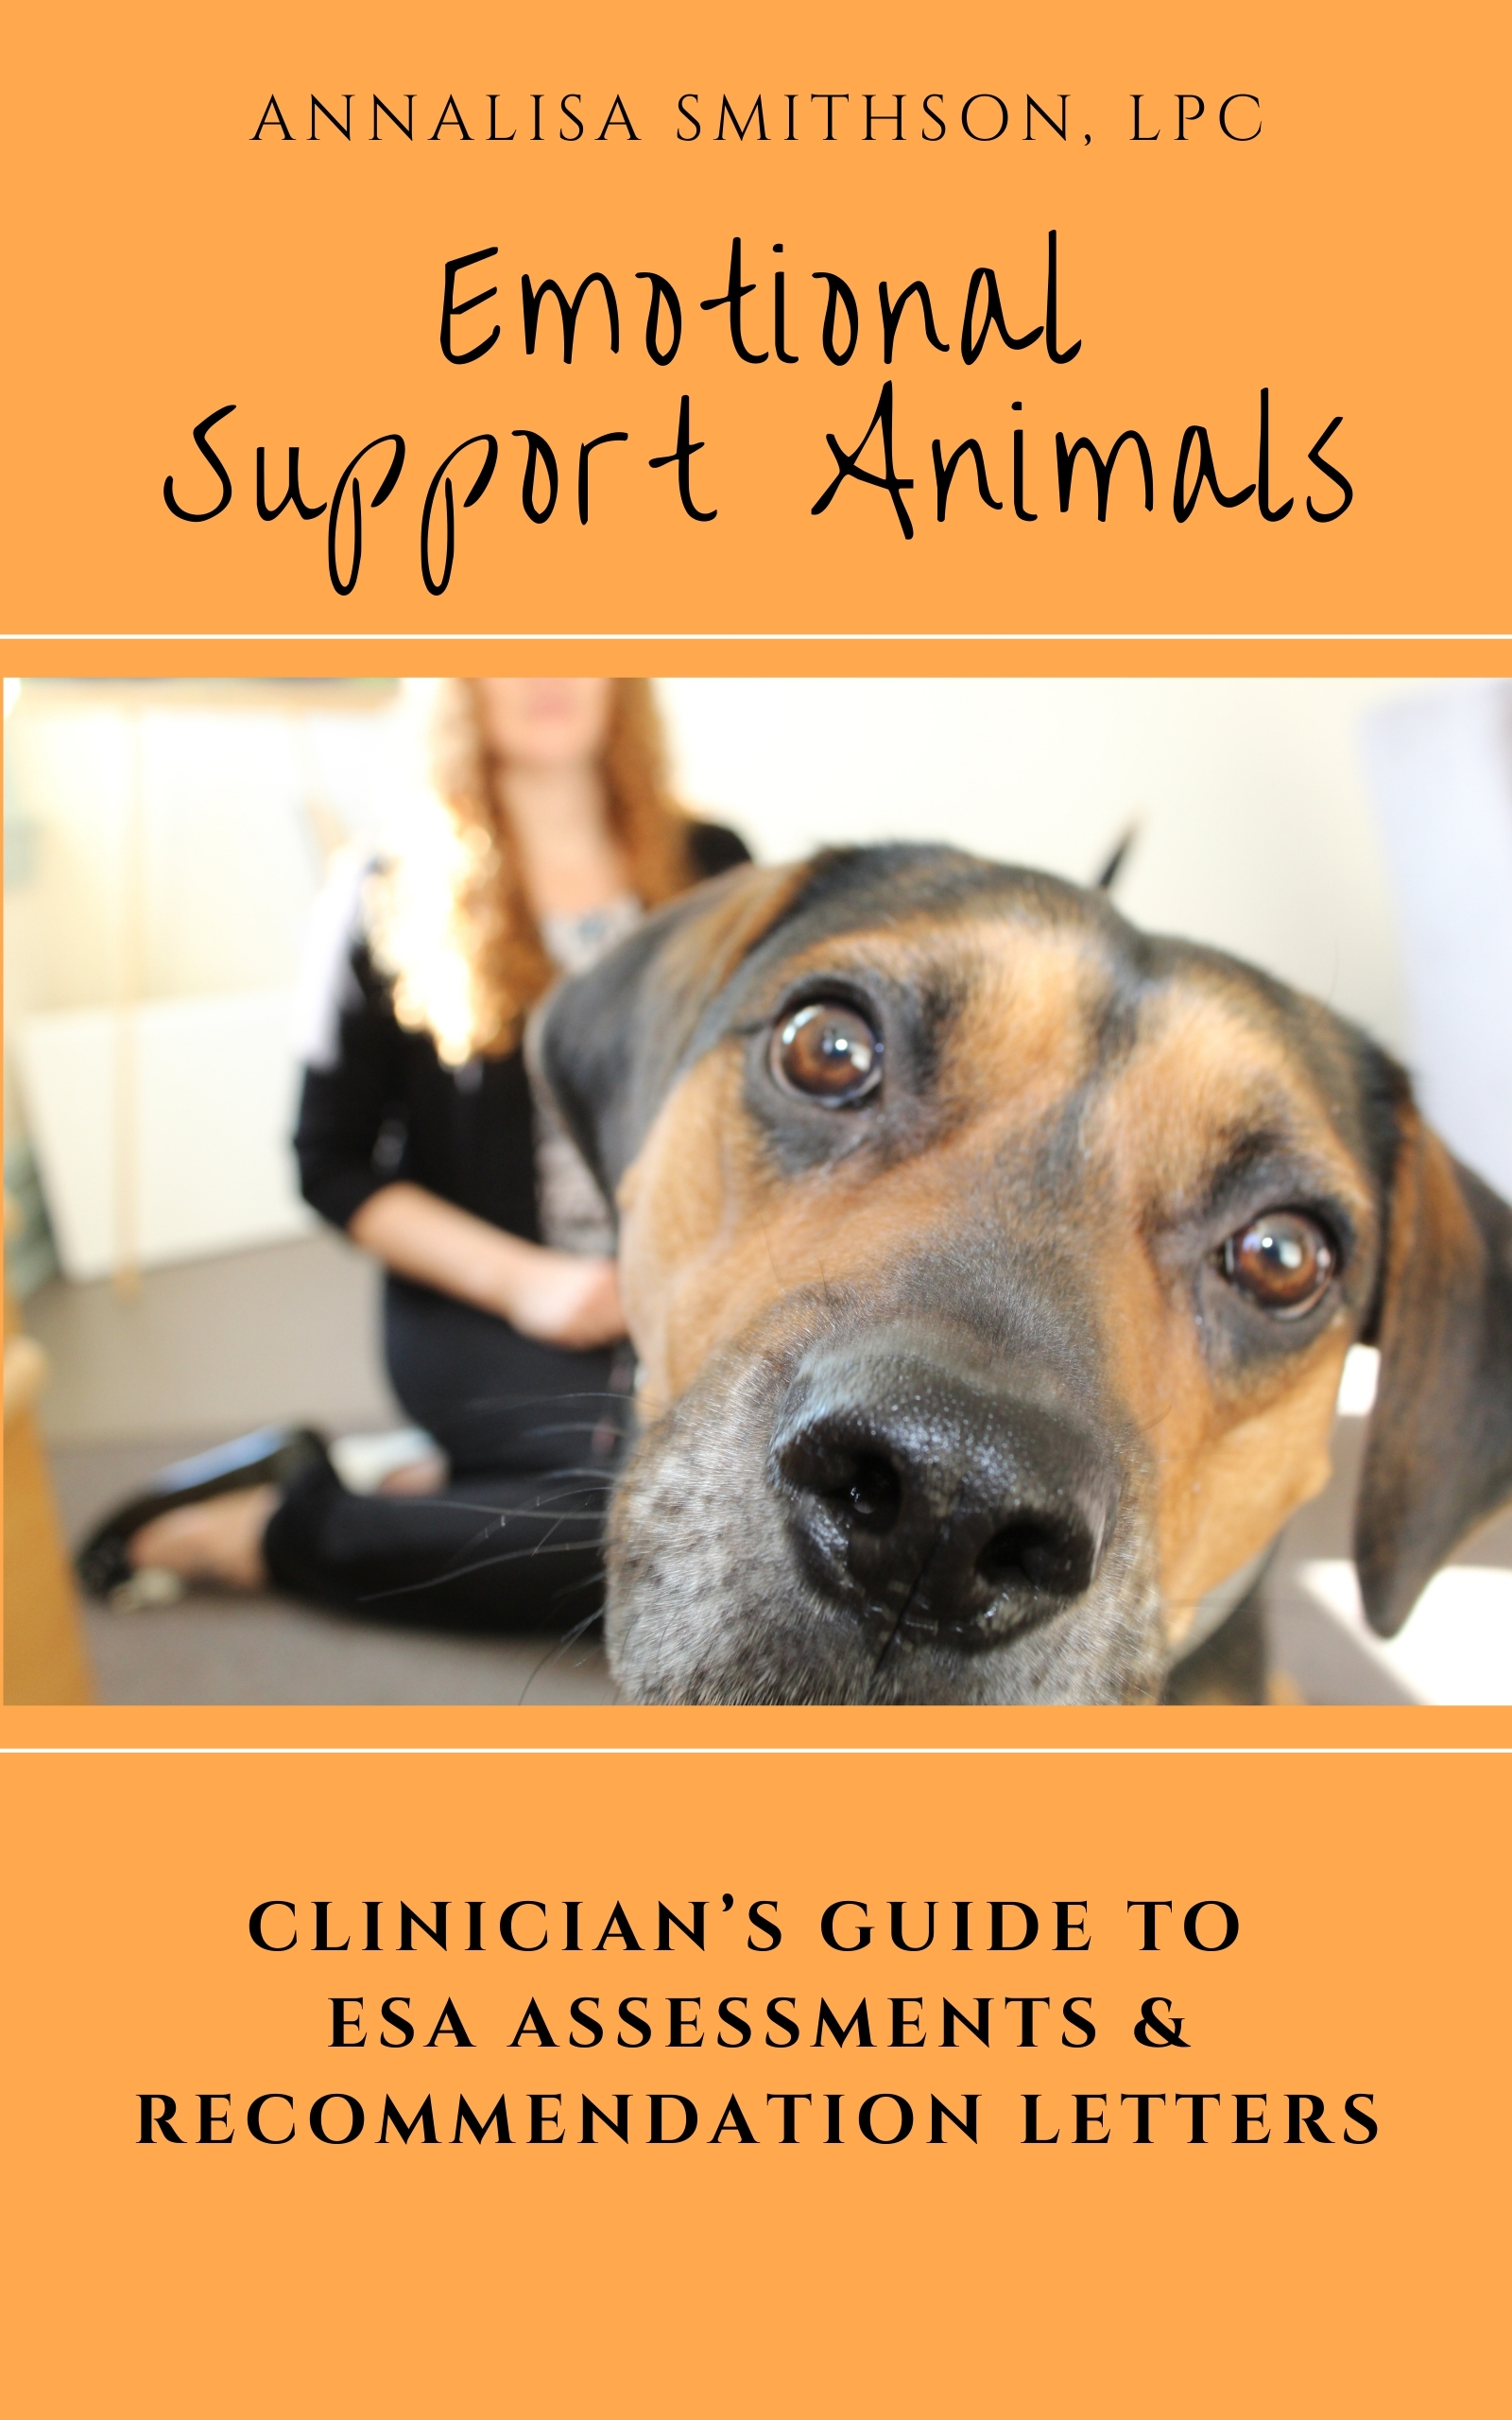 Ethics of Emotional Support Animals - Unleashed Counseling